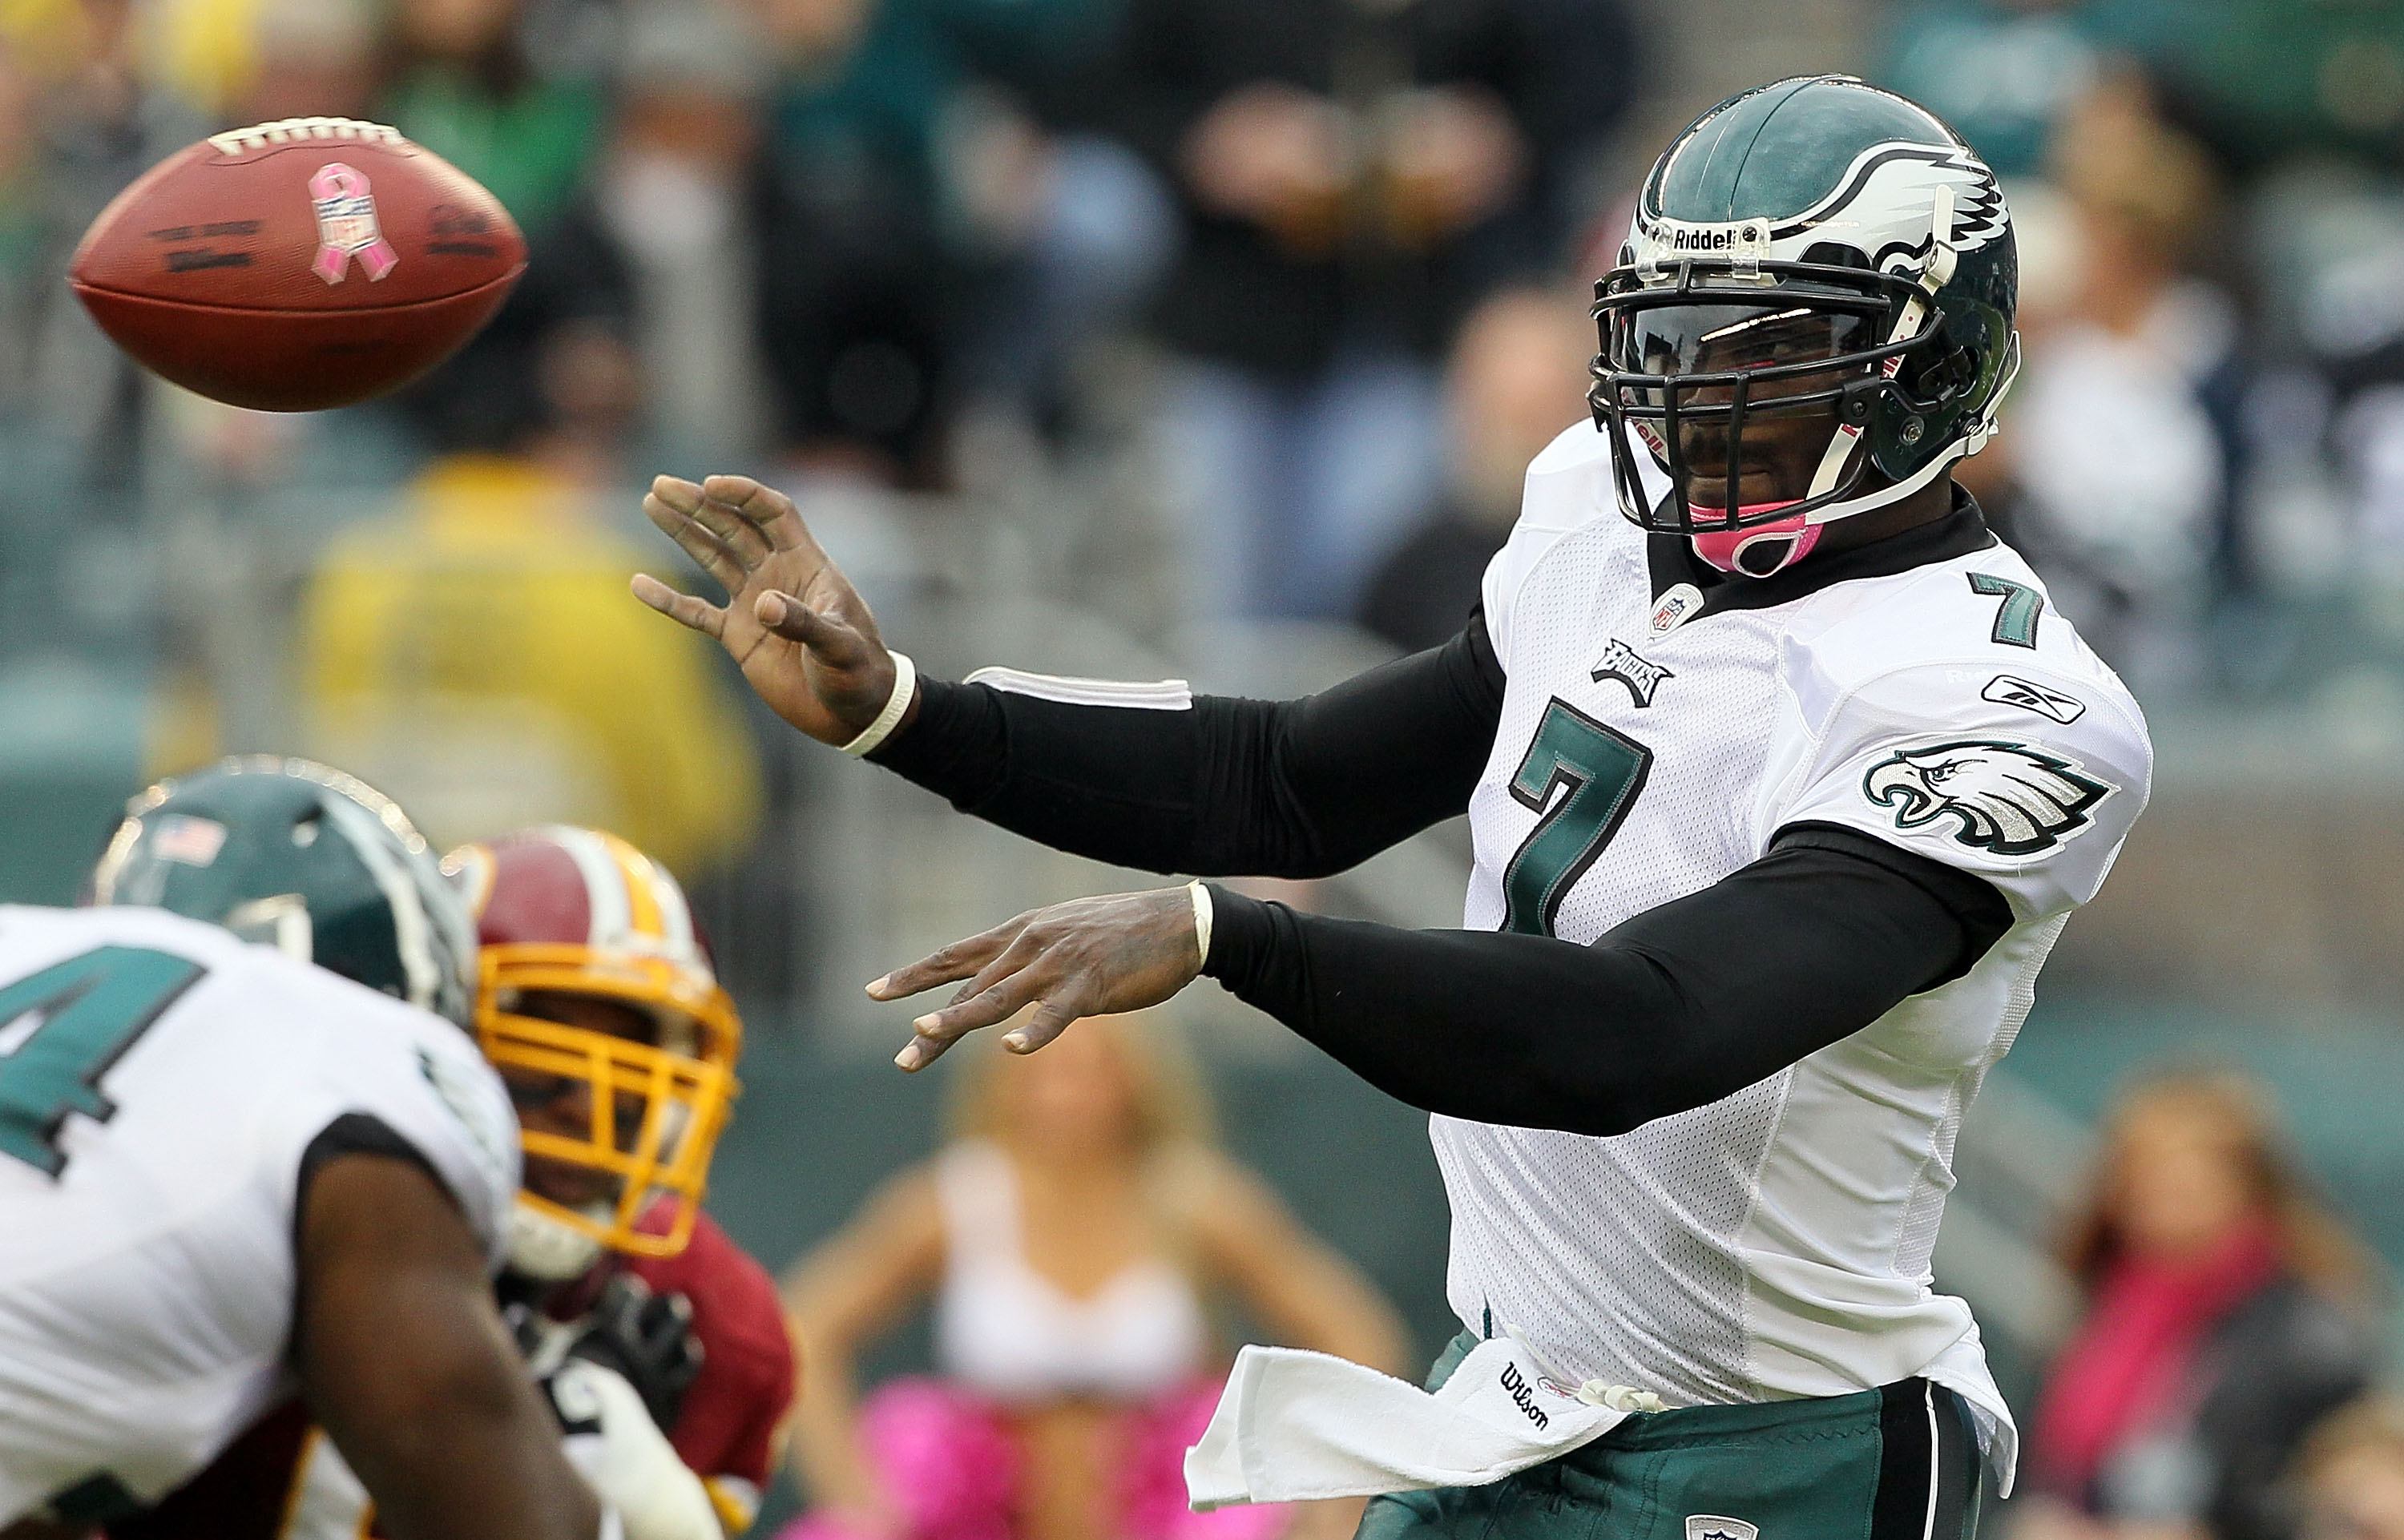 PHILADELPHIA - OCTOBER 03:  Michael Vick #7 of the Philadelphia Eagles throws a pass against the Washington Redskins on October 3, 2010 at Lincoln Financial Field in Philadelphia, Pennsylvania.  (Photo by Jim McIsaac/Getty Images)